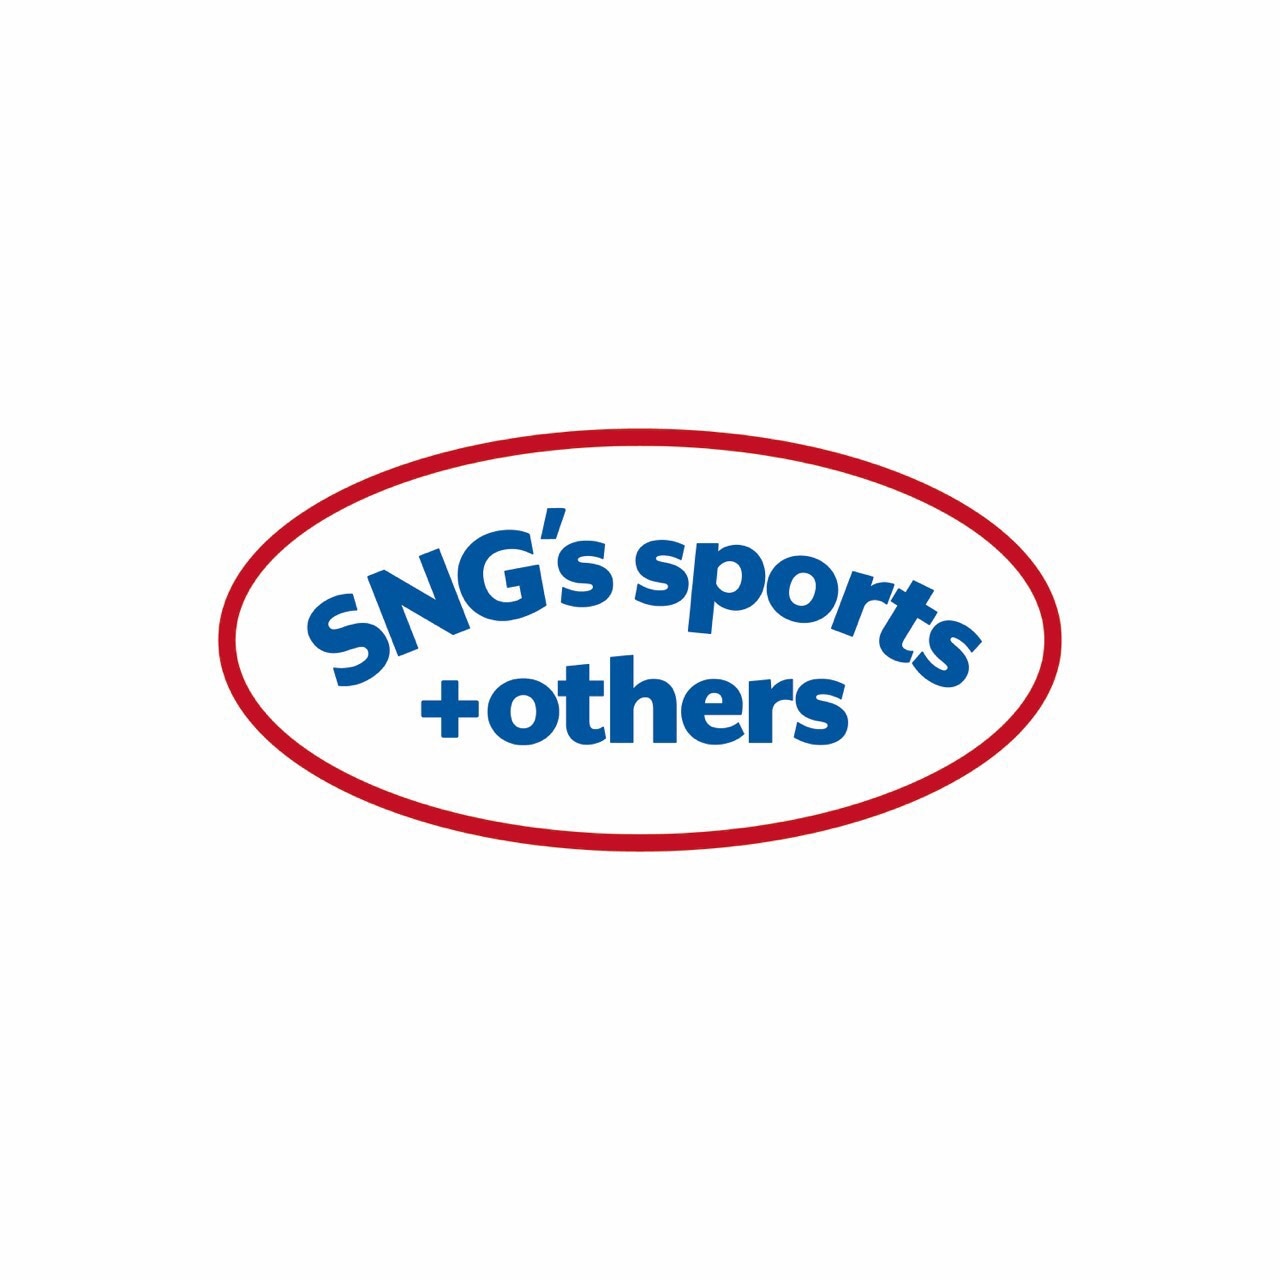 SNG’s sports + others